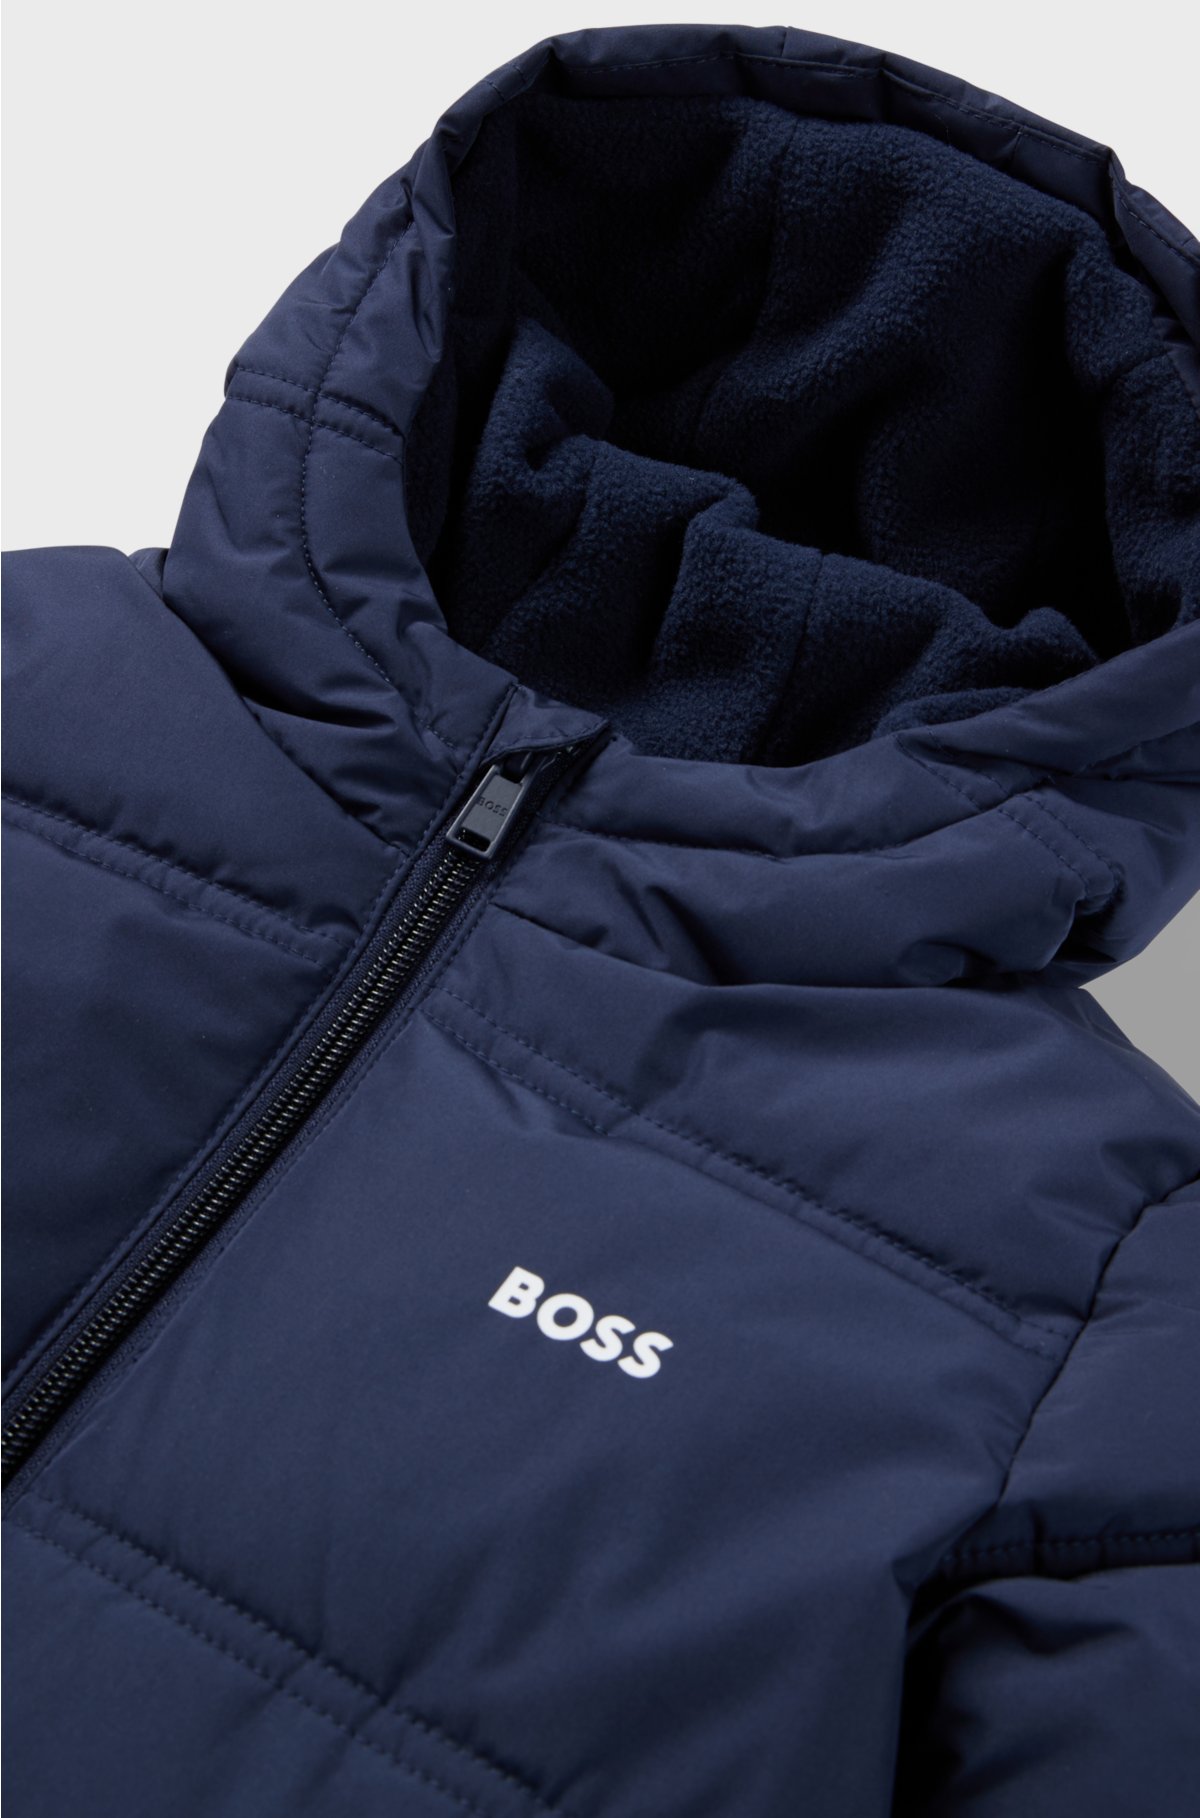 Kids' hooded jacket with logo details and padding, Dark Blue